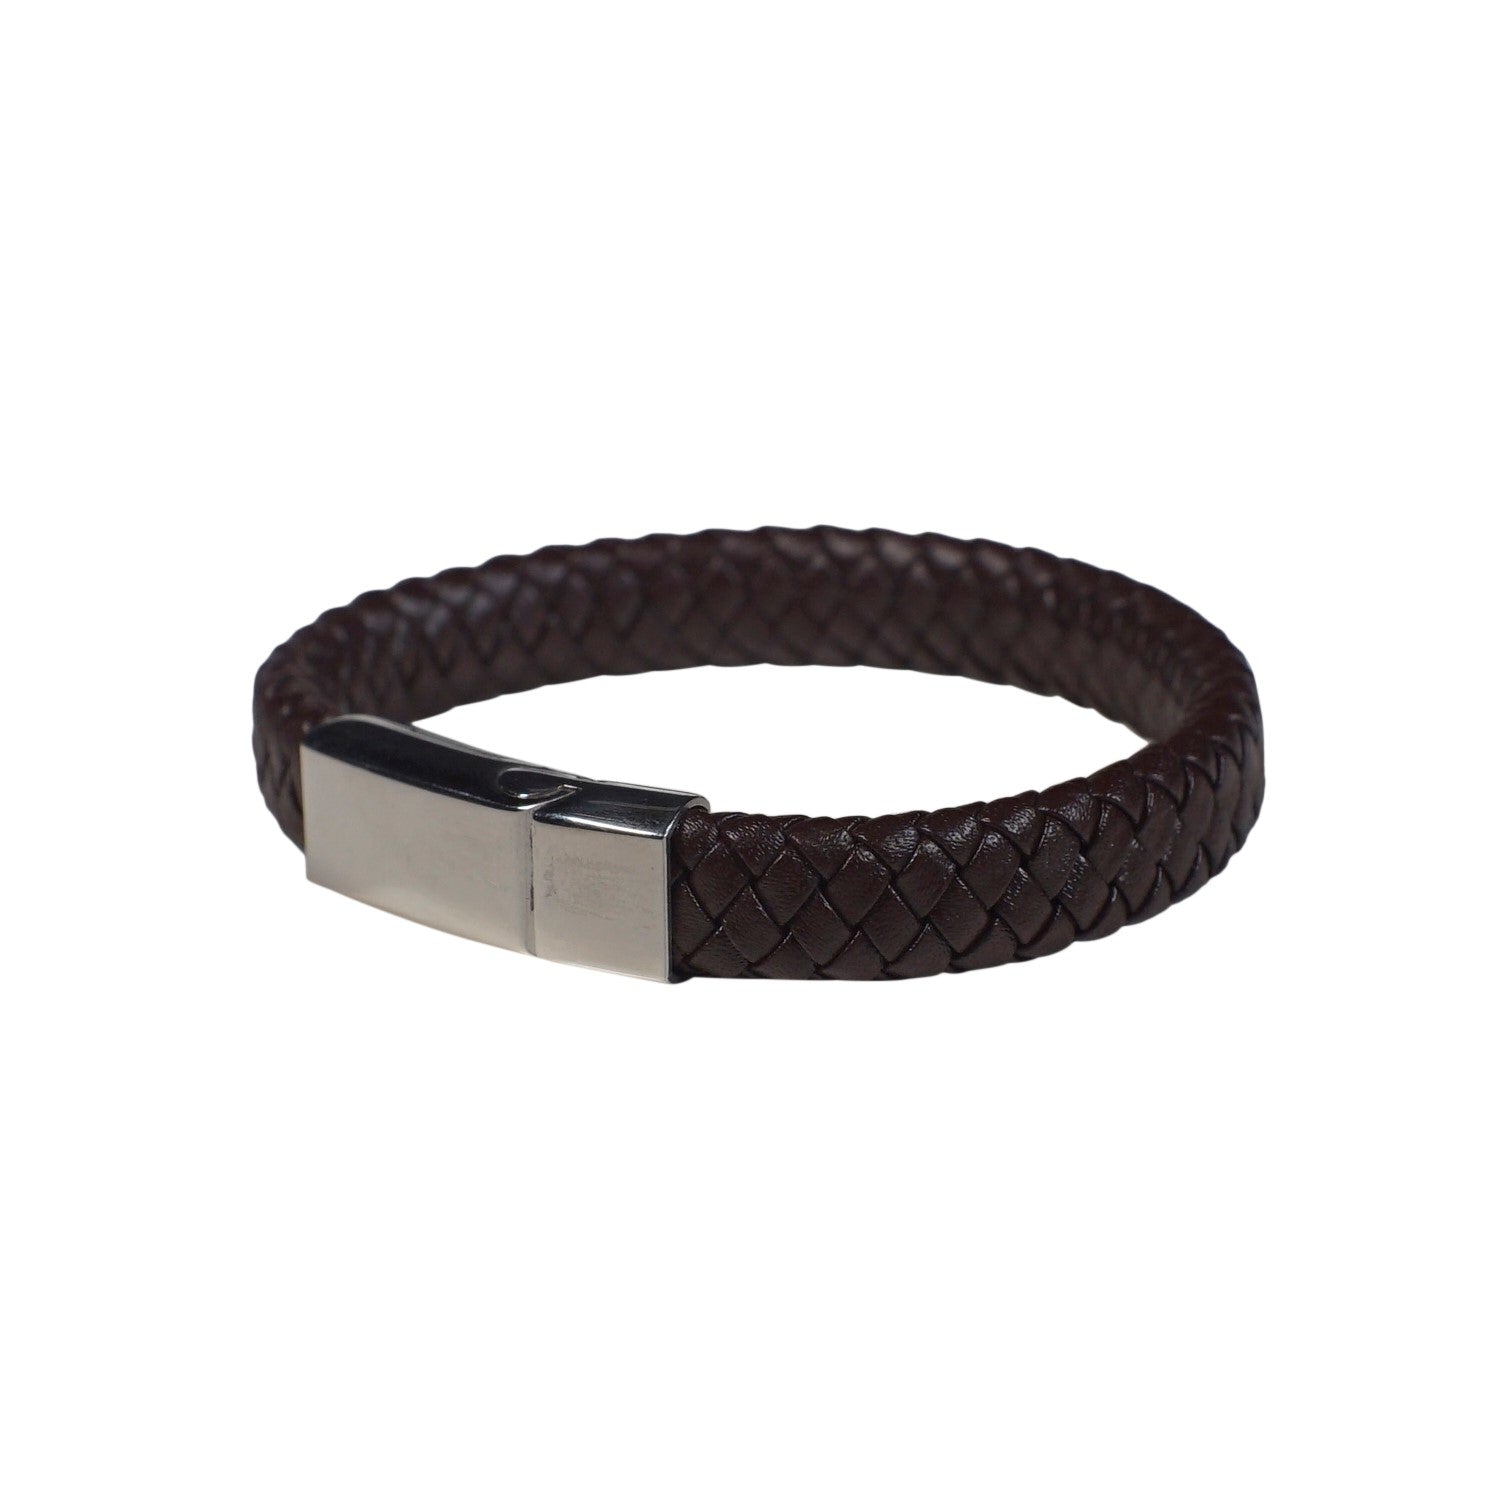 Chester Leather Bracelet in Brown (Size M) - Nomad watch Works